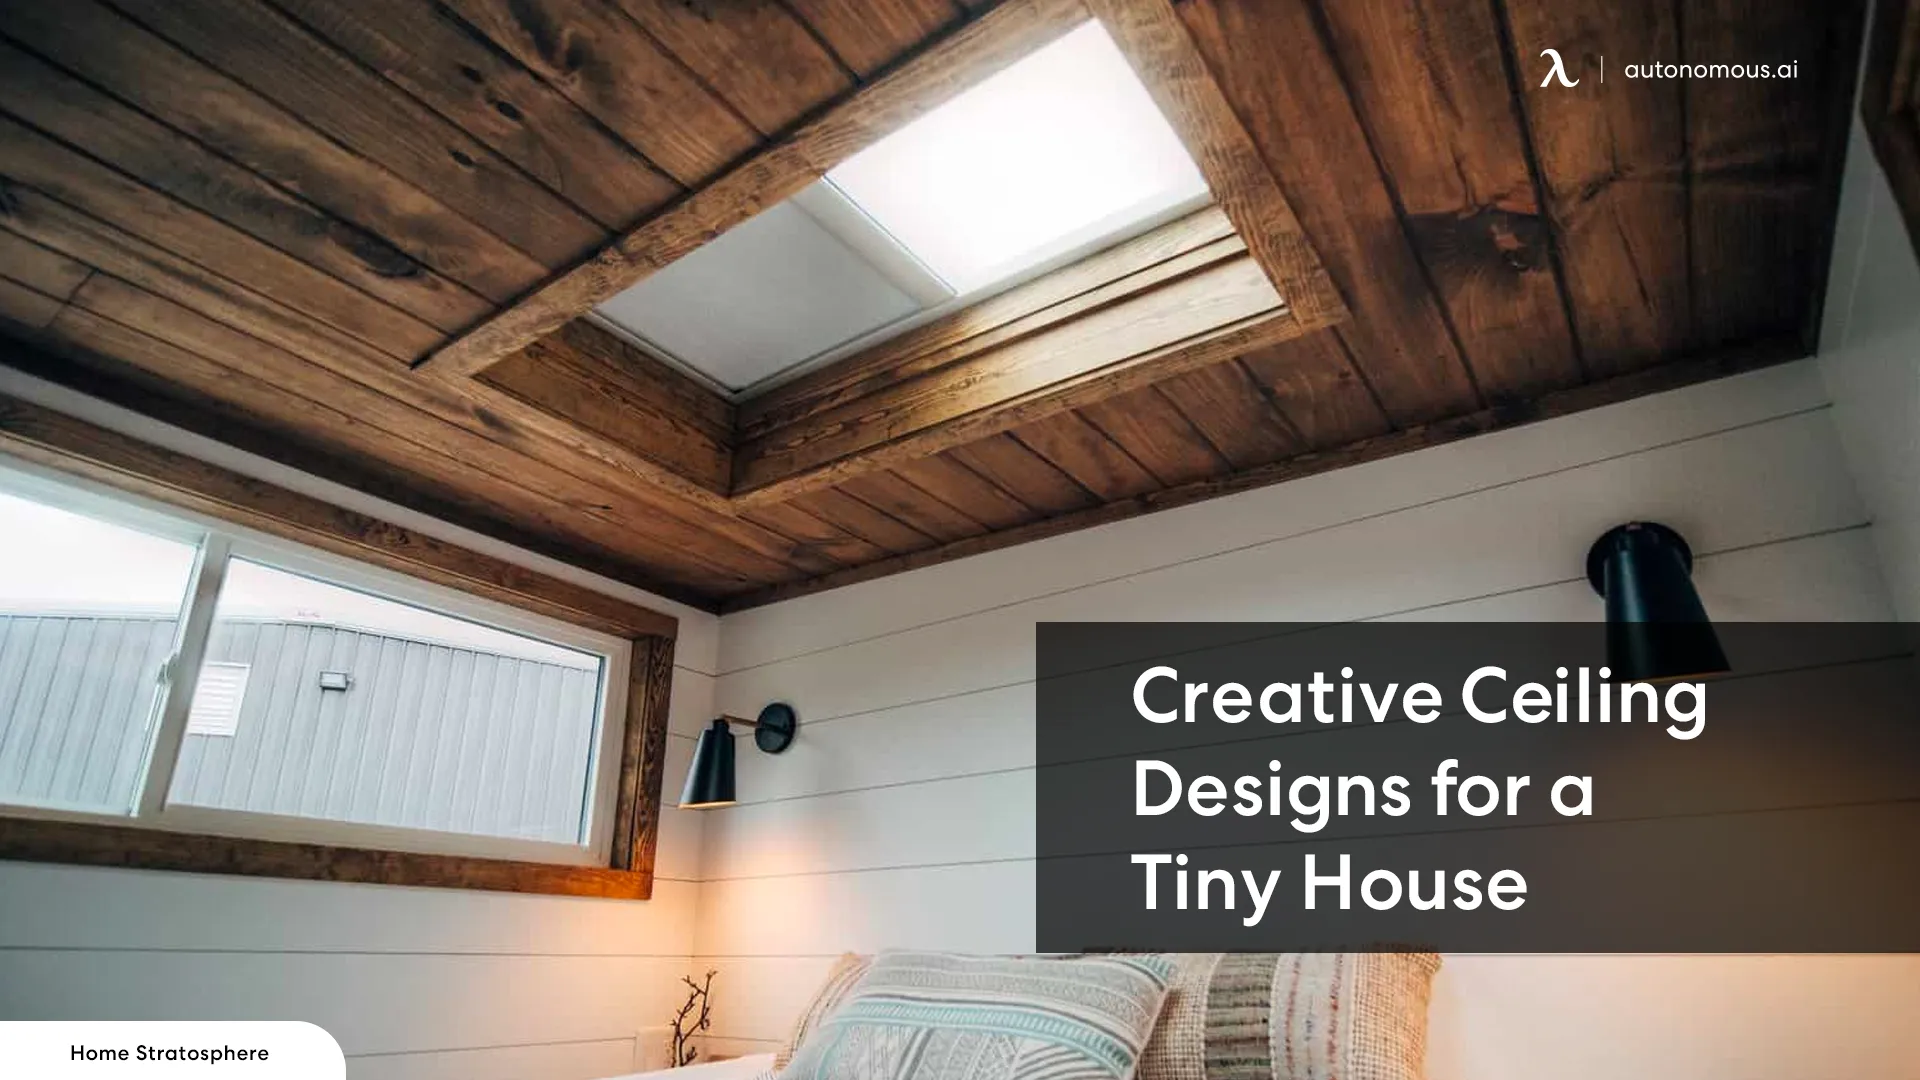 Small Space, Big Ideas: Creative Ceiling Designs for Tiny Houses